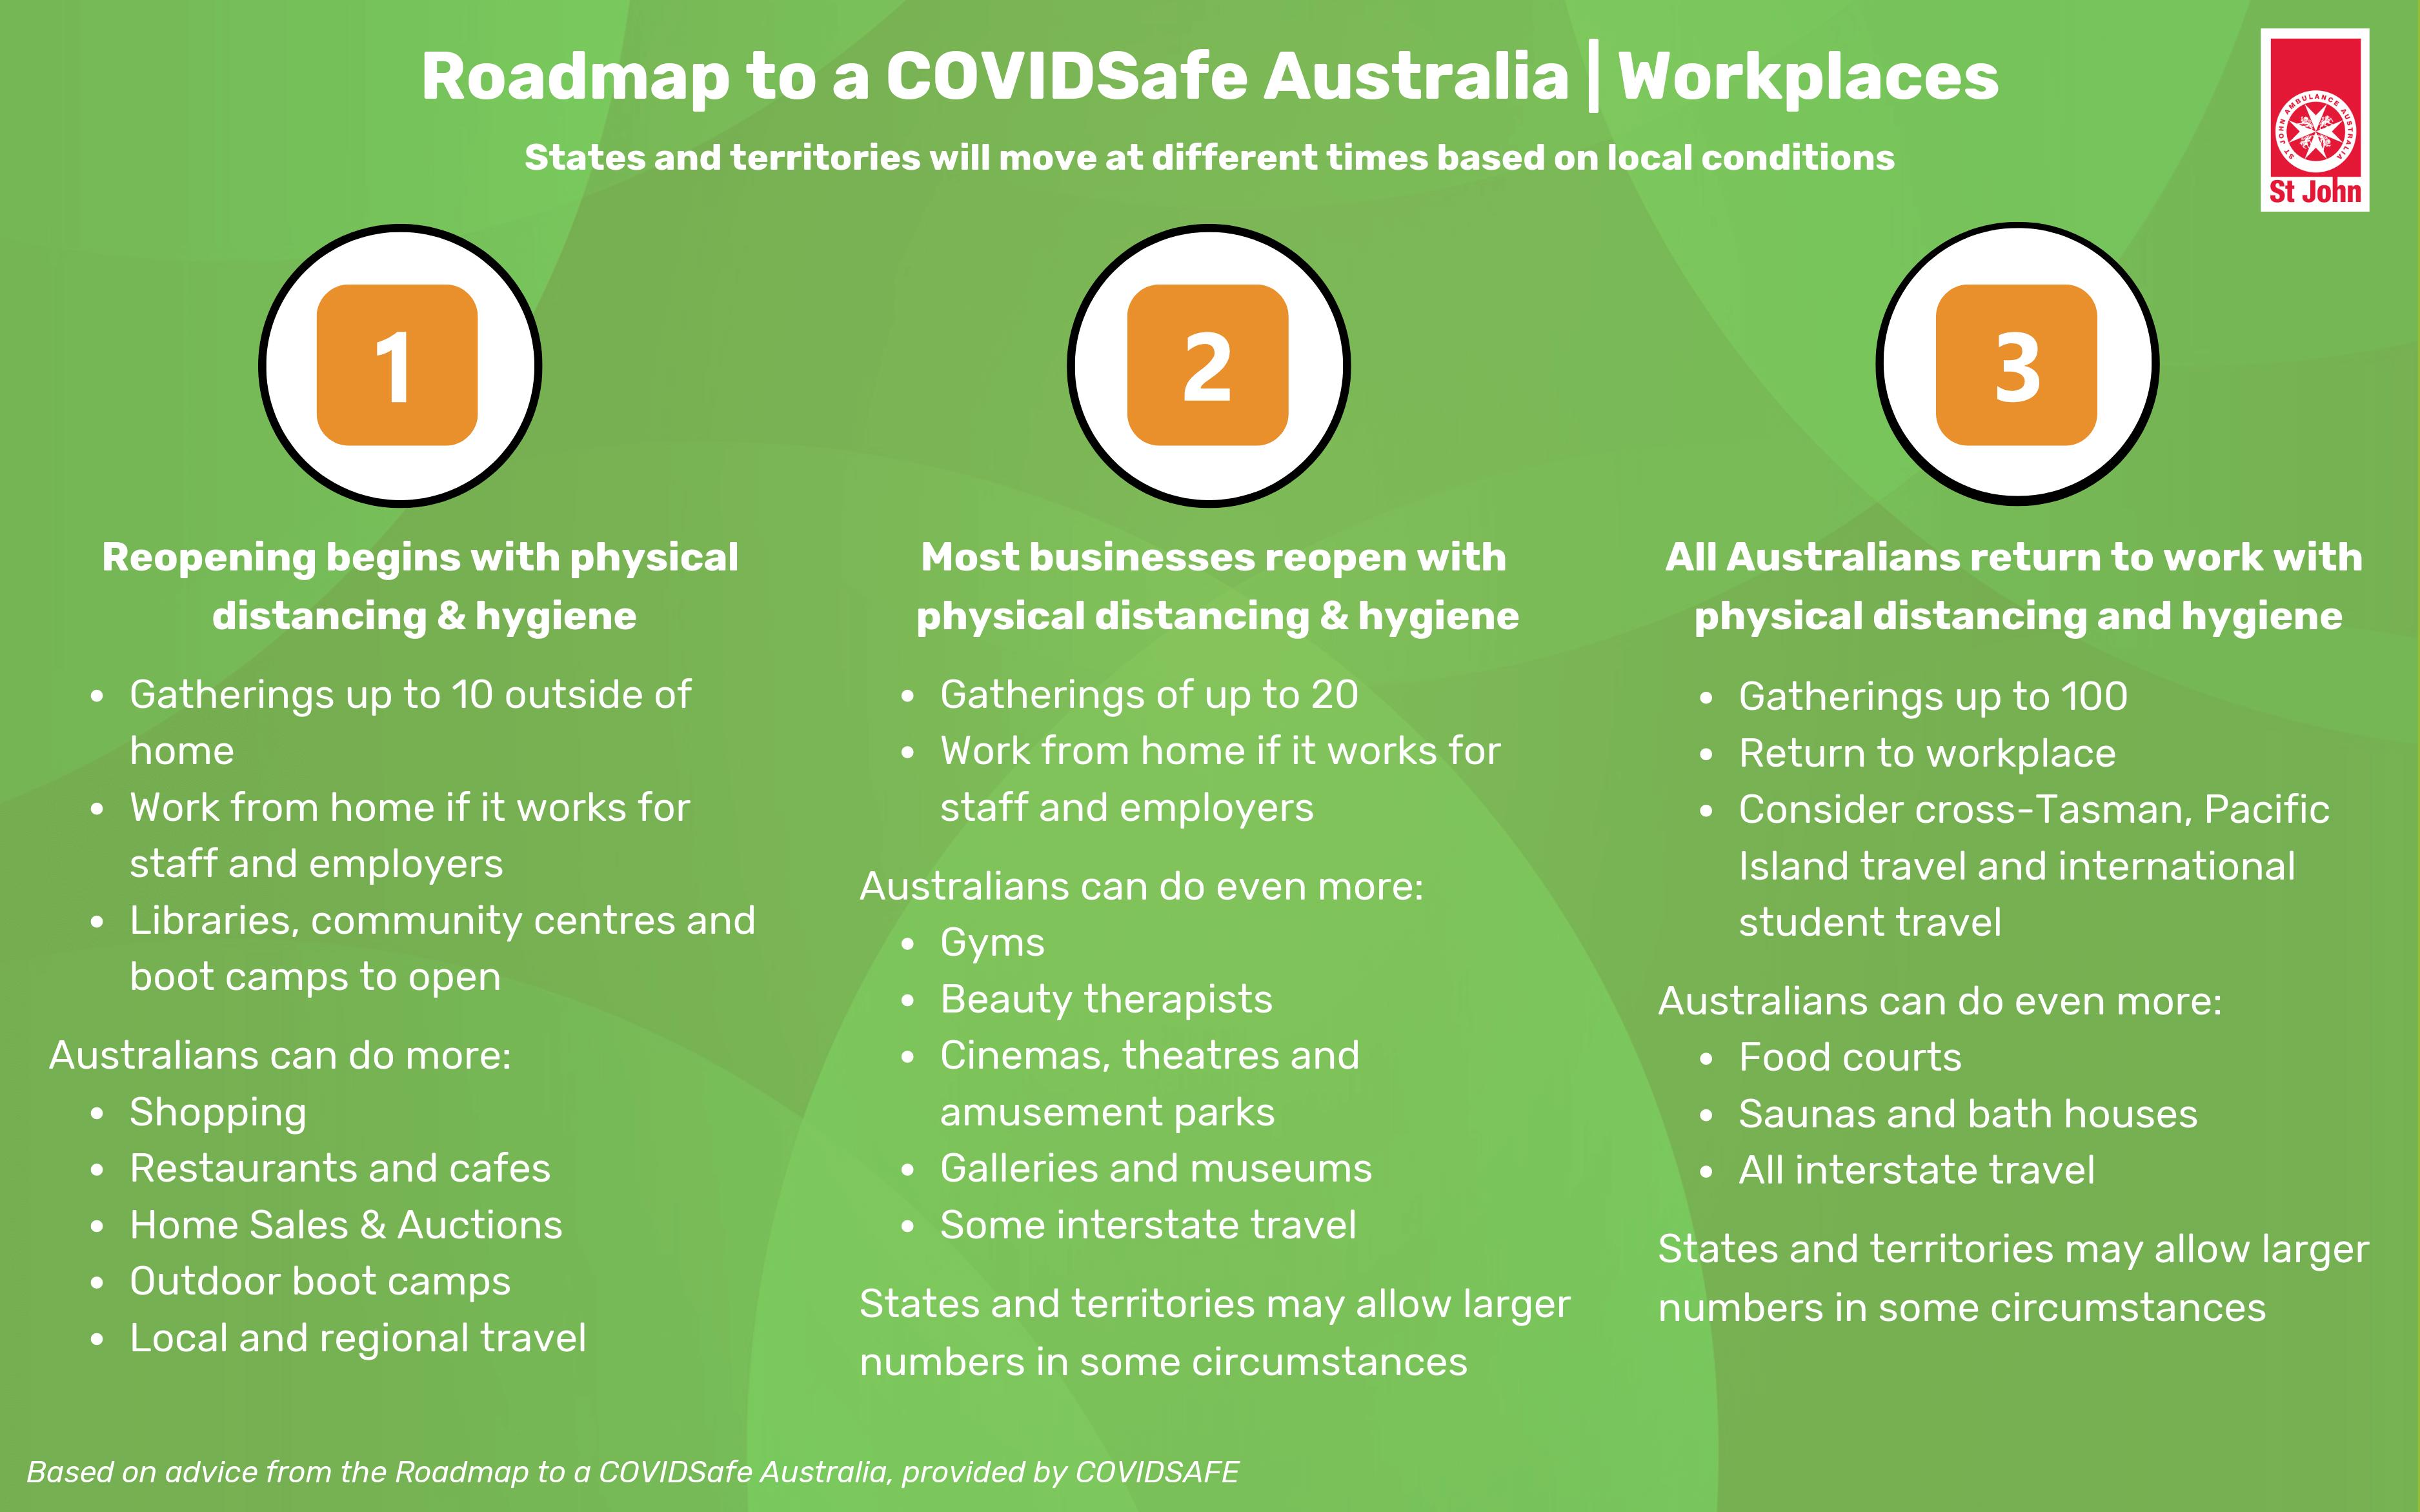 Roadmap to a COVIDSafe Australia for Workplaces and Businesses